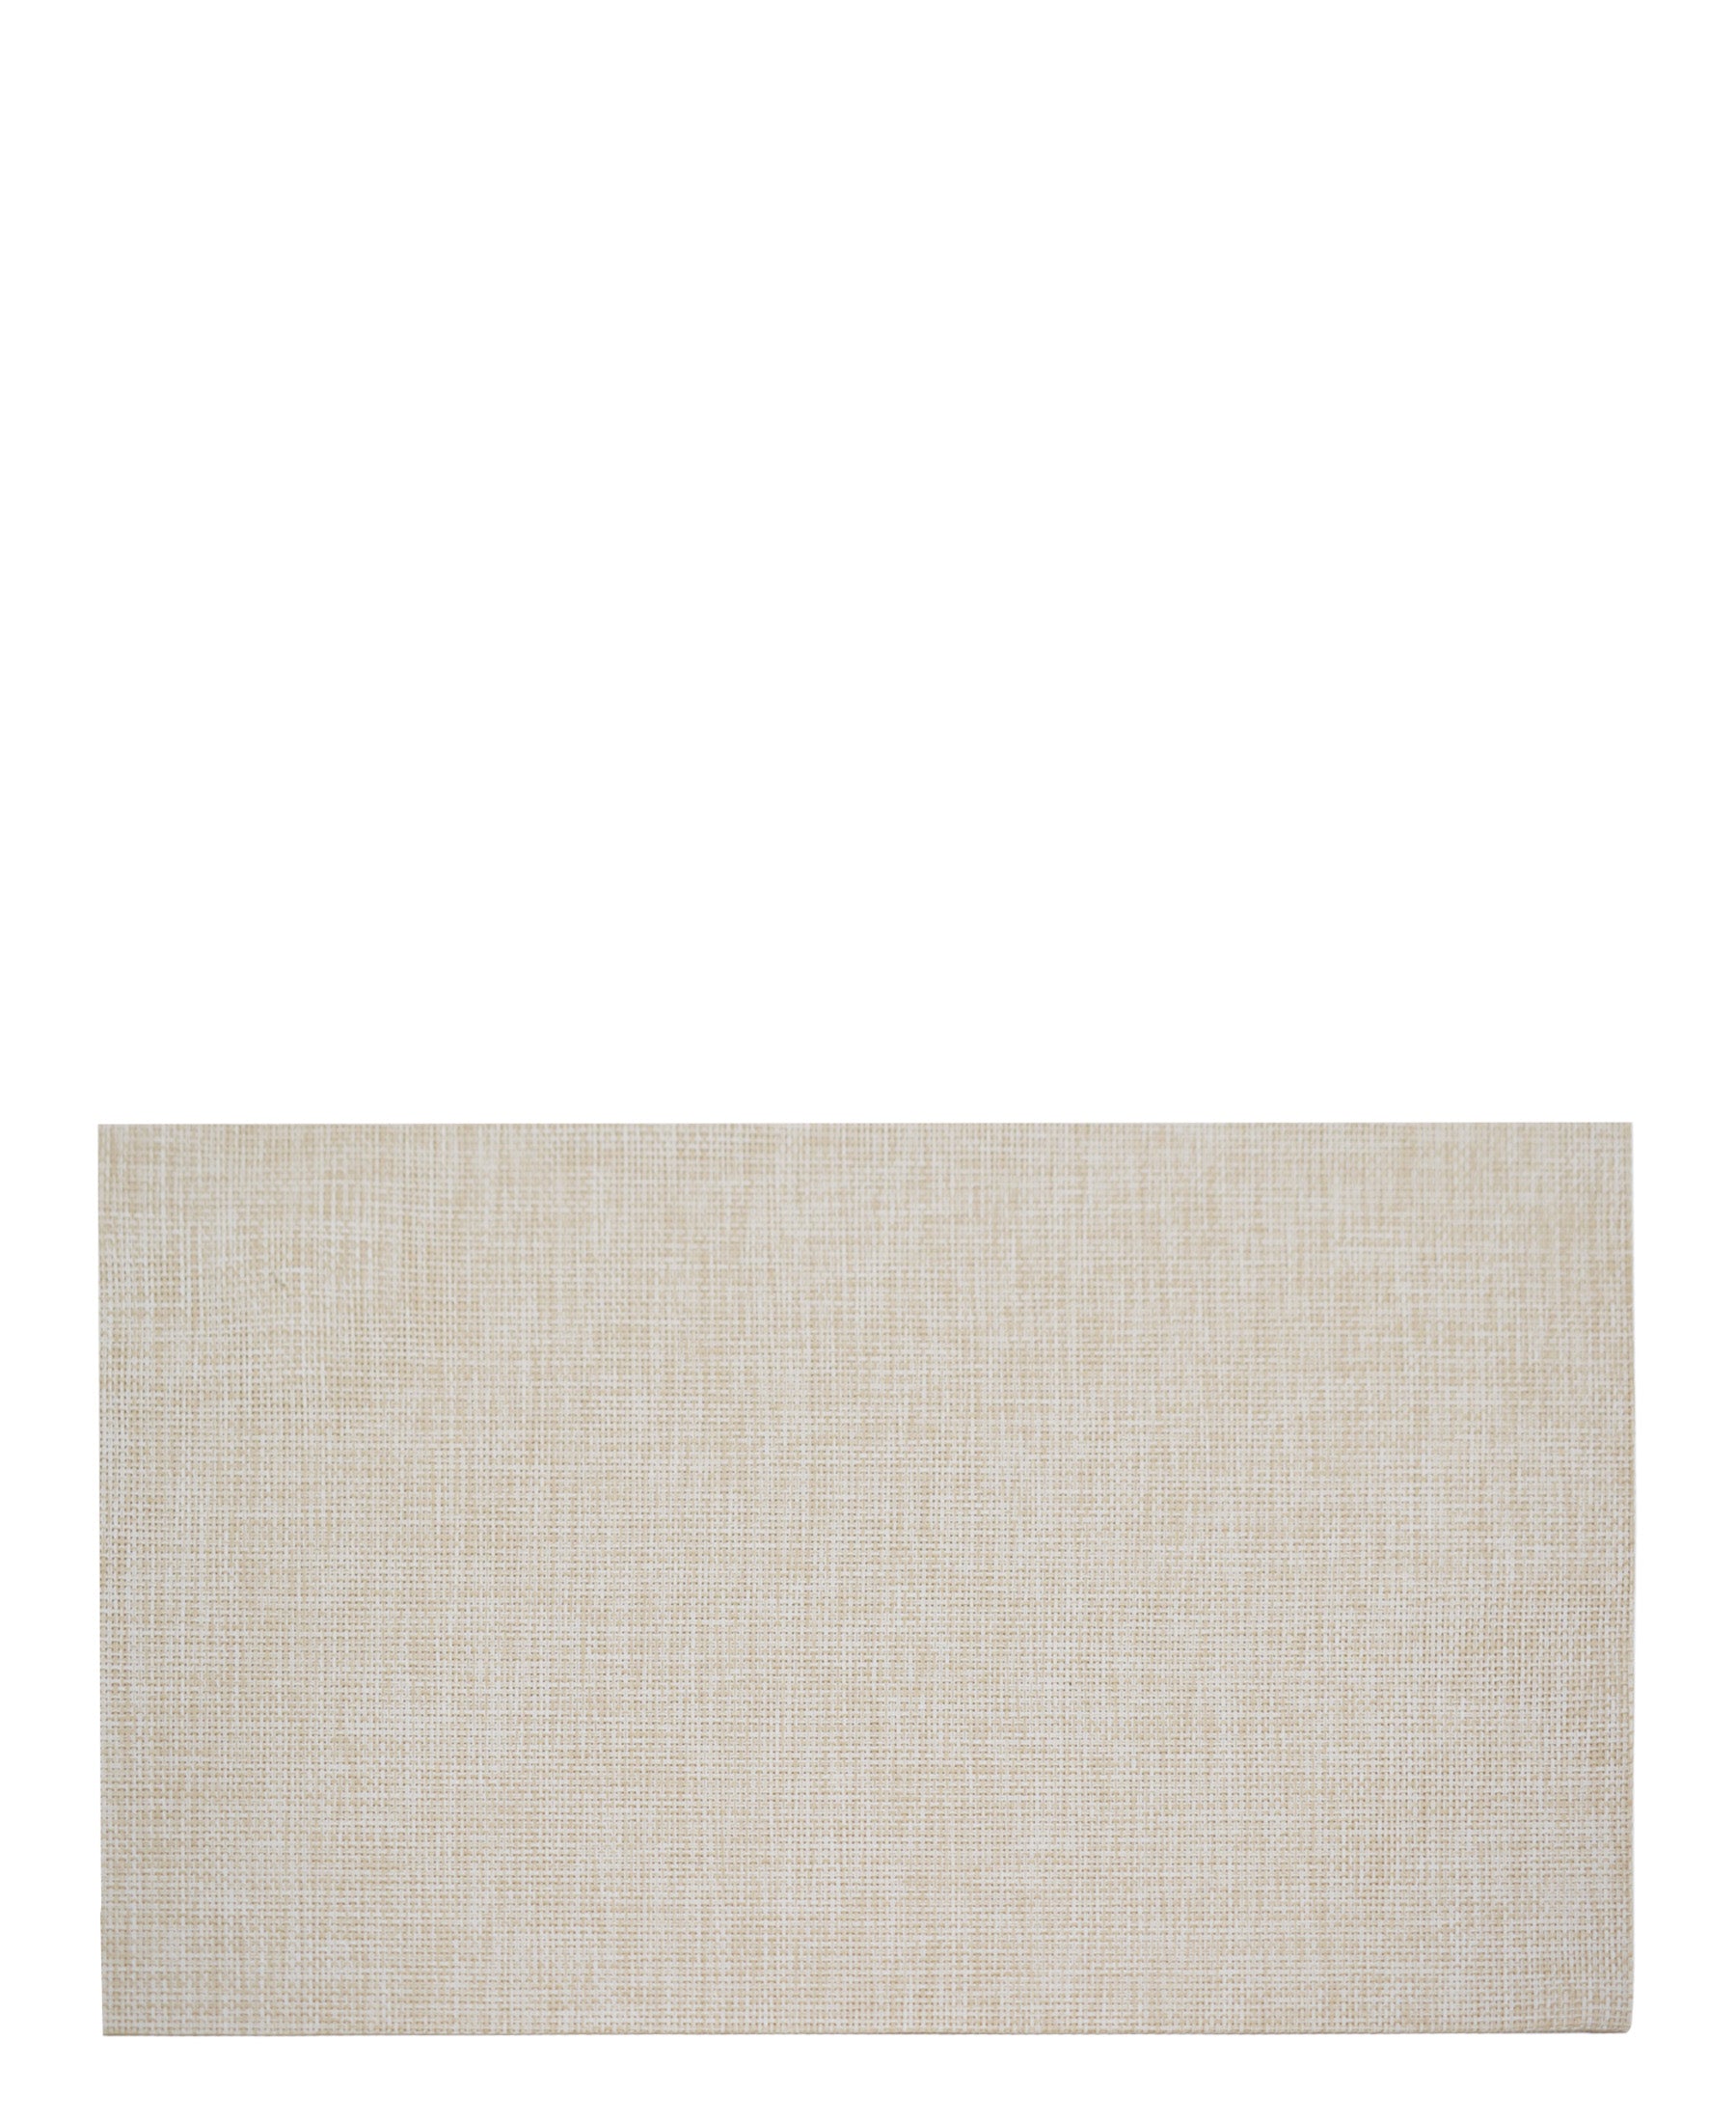 Crosshatch Placemat 45x30cm - Taupe